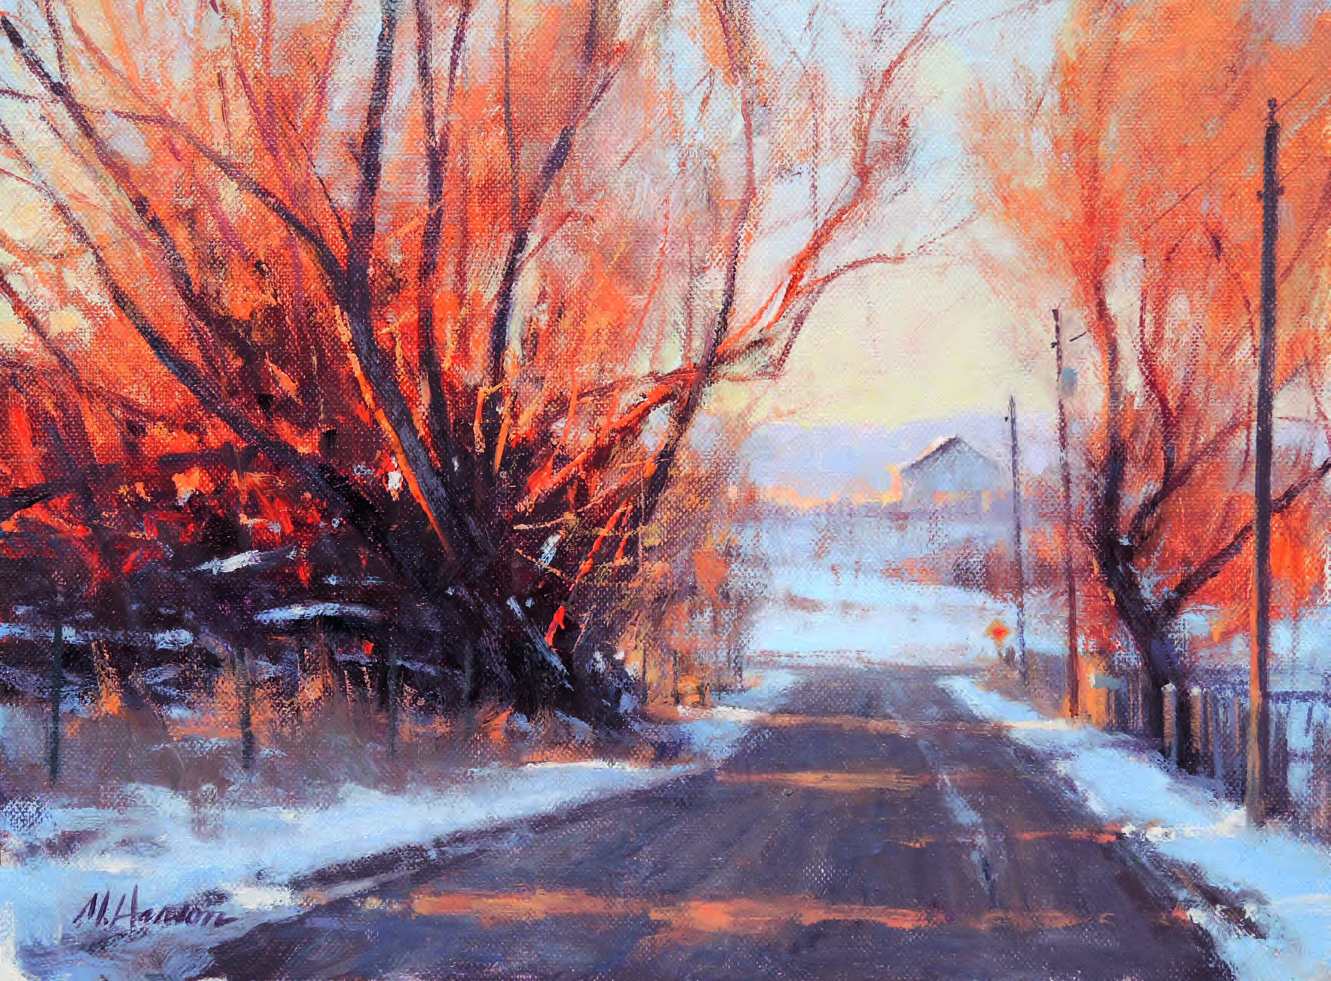 Marc Hanson, Morning Drive, 2013, acrylic on panel, 9" x 12". Plein air. Private collection.